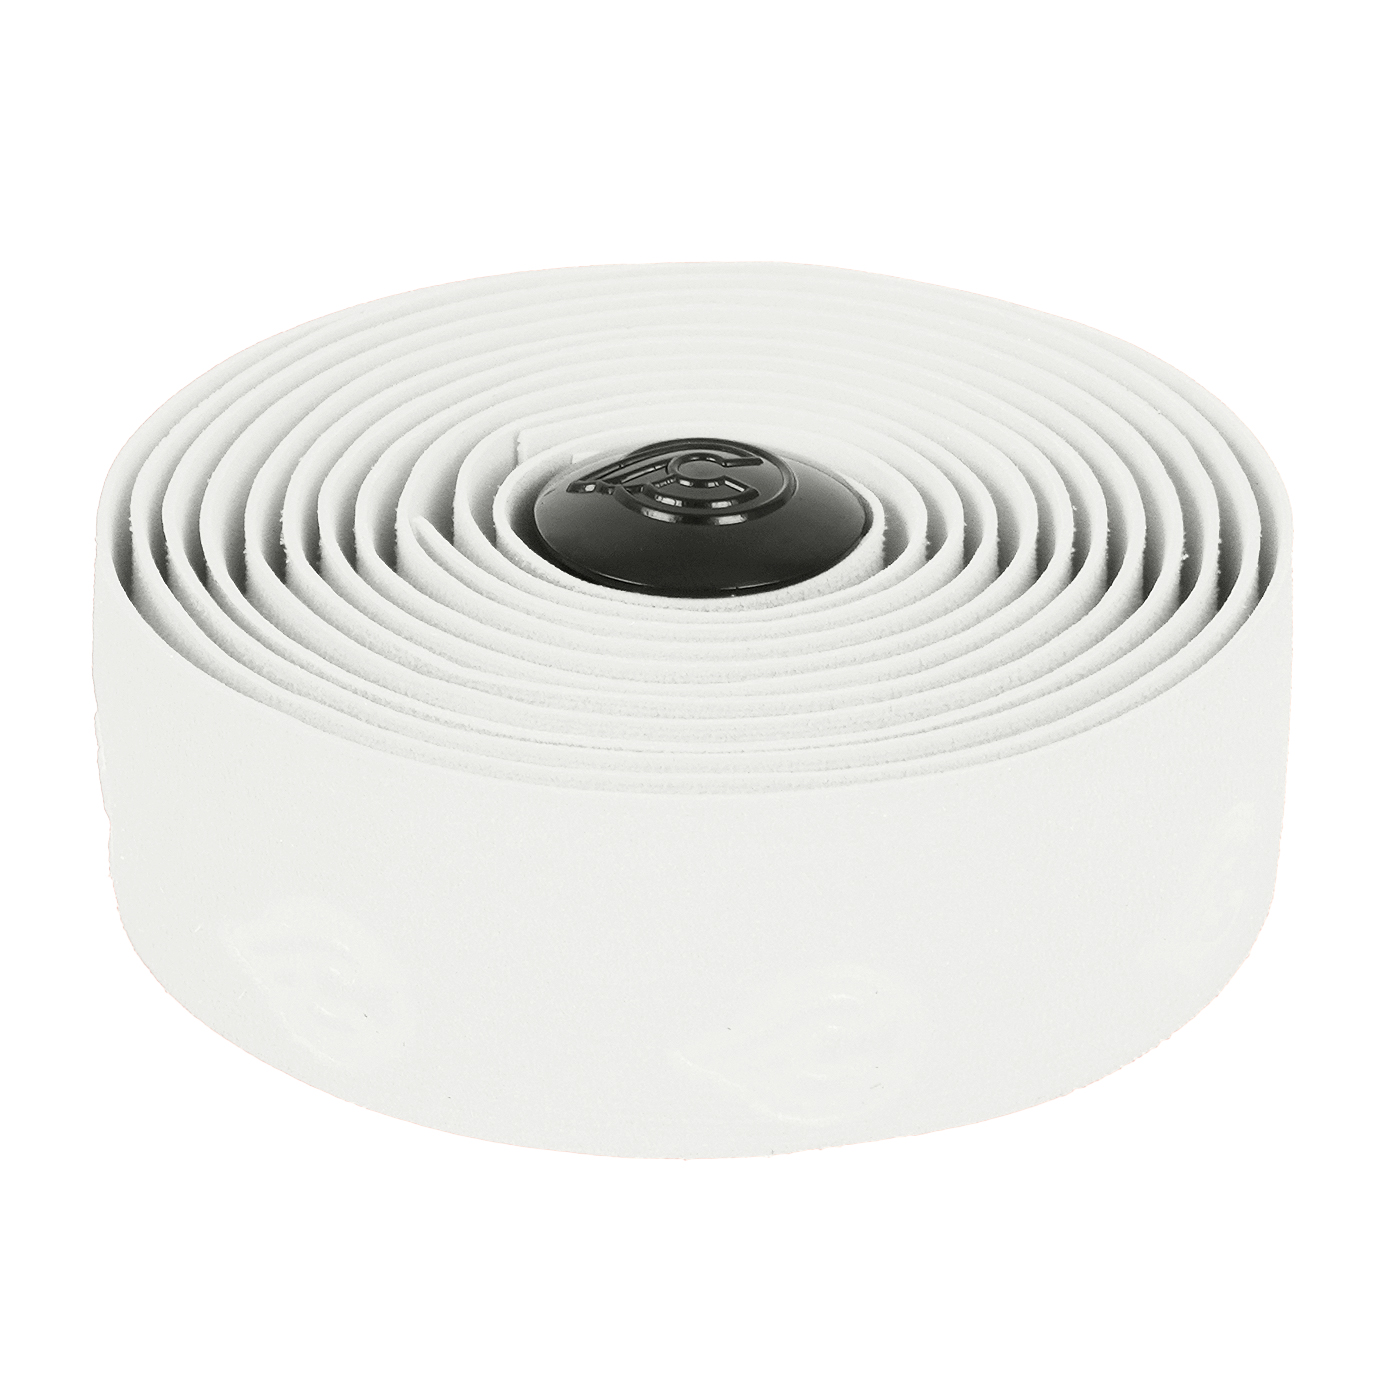 Picture of Cinelli Wave - Handlebar Tape - white